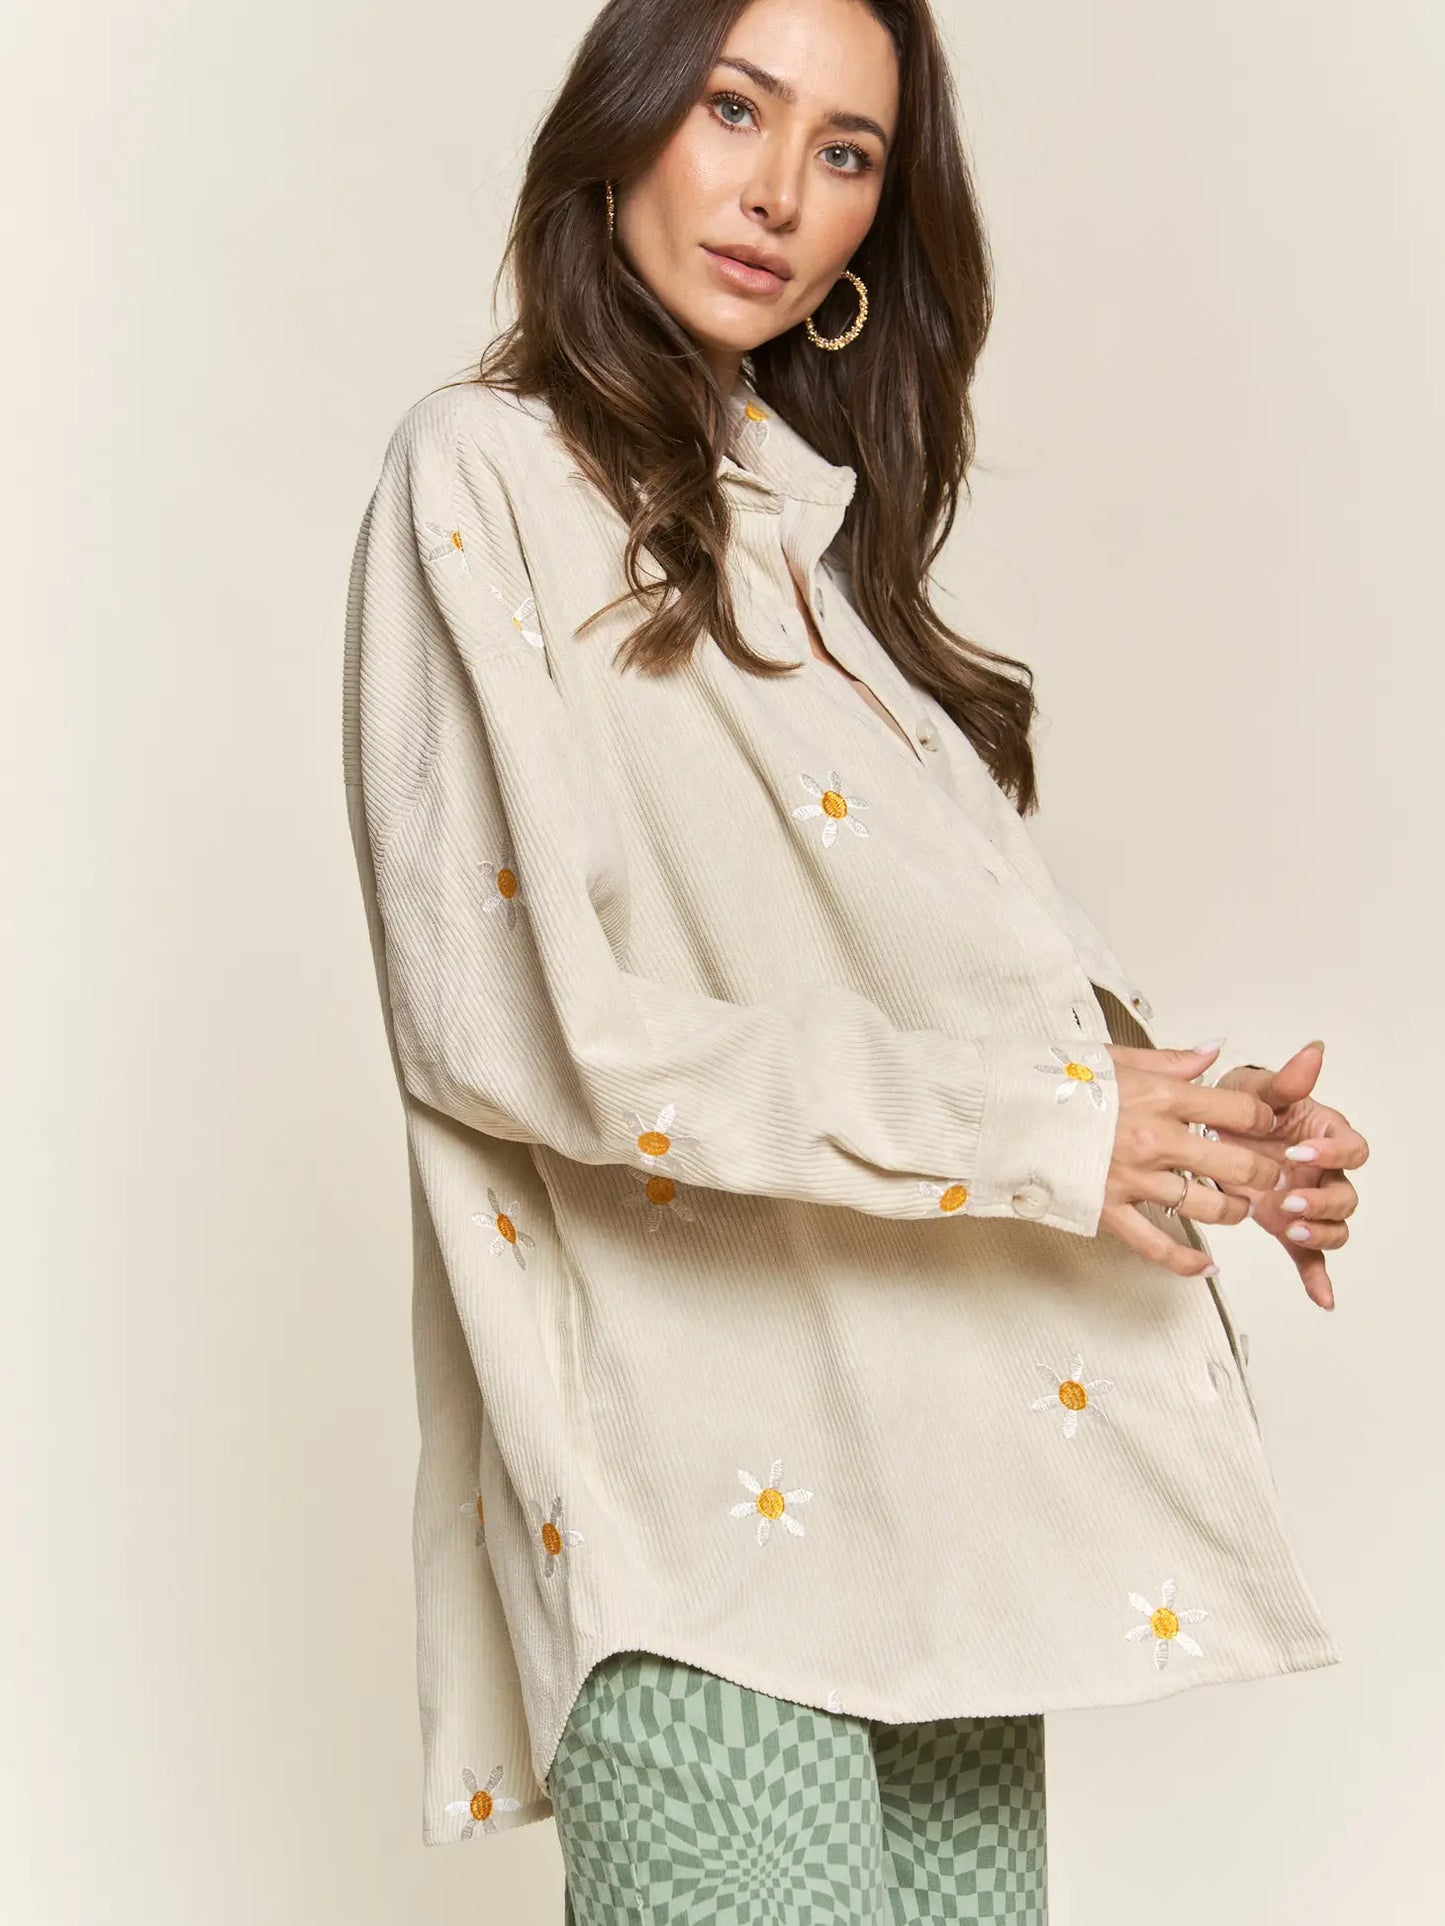 Almond Daisy Embroidered Corduroy Button Down